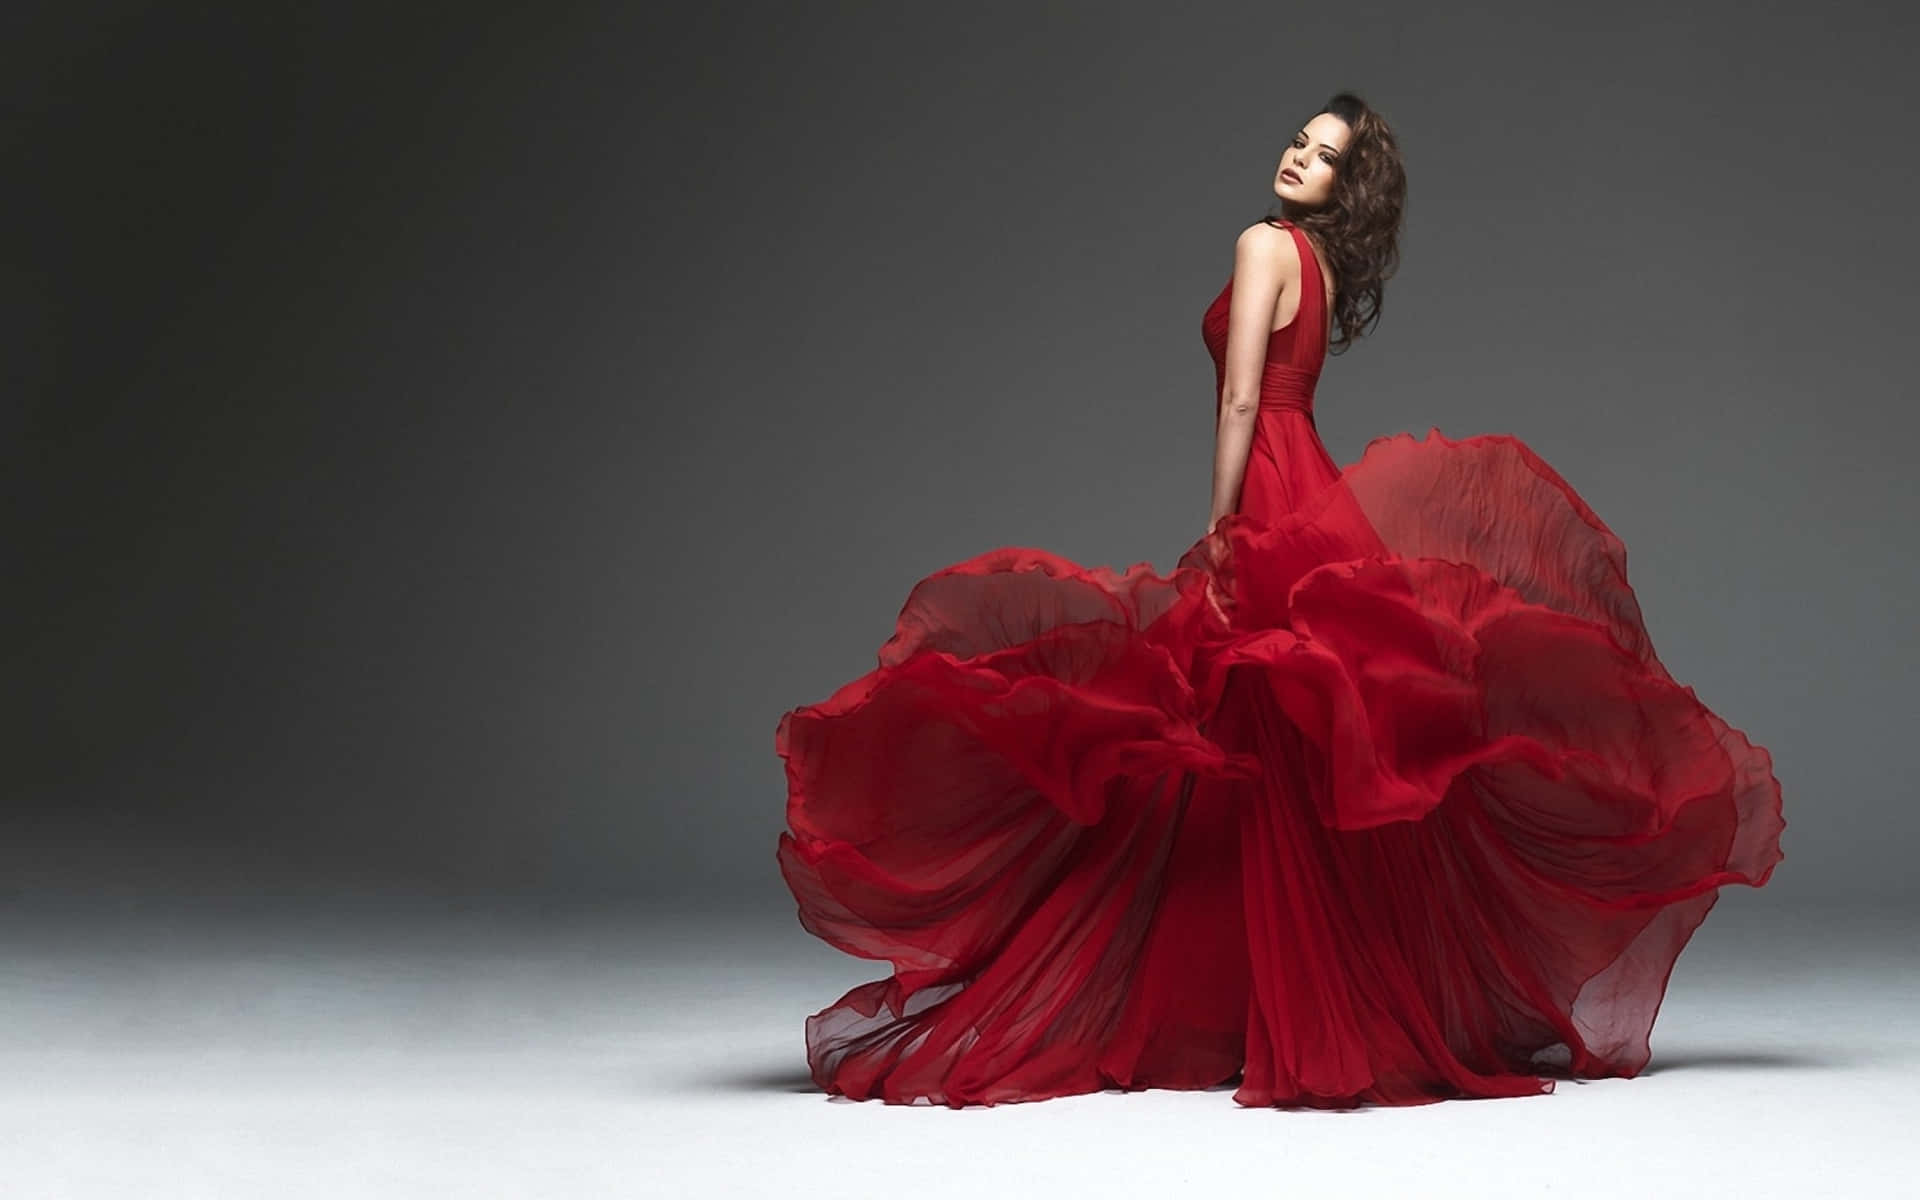 A Woman In A Red Dress Is Posing